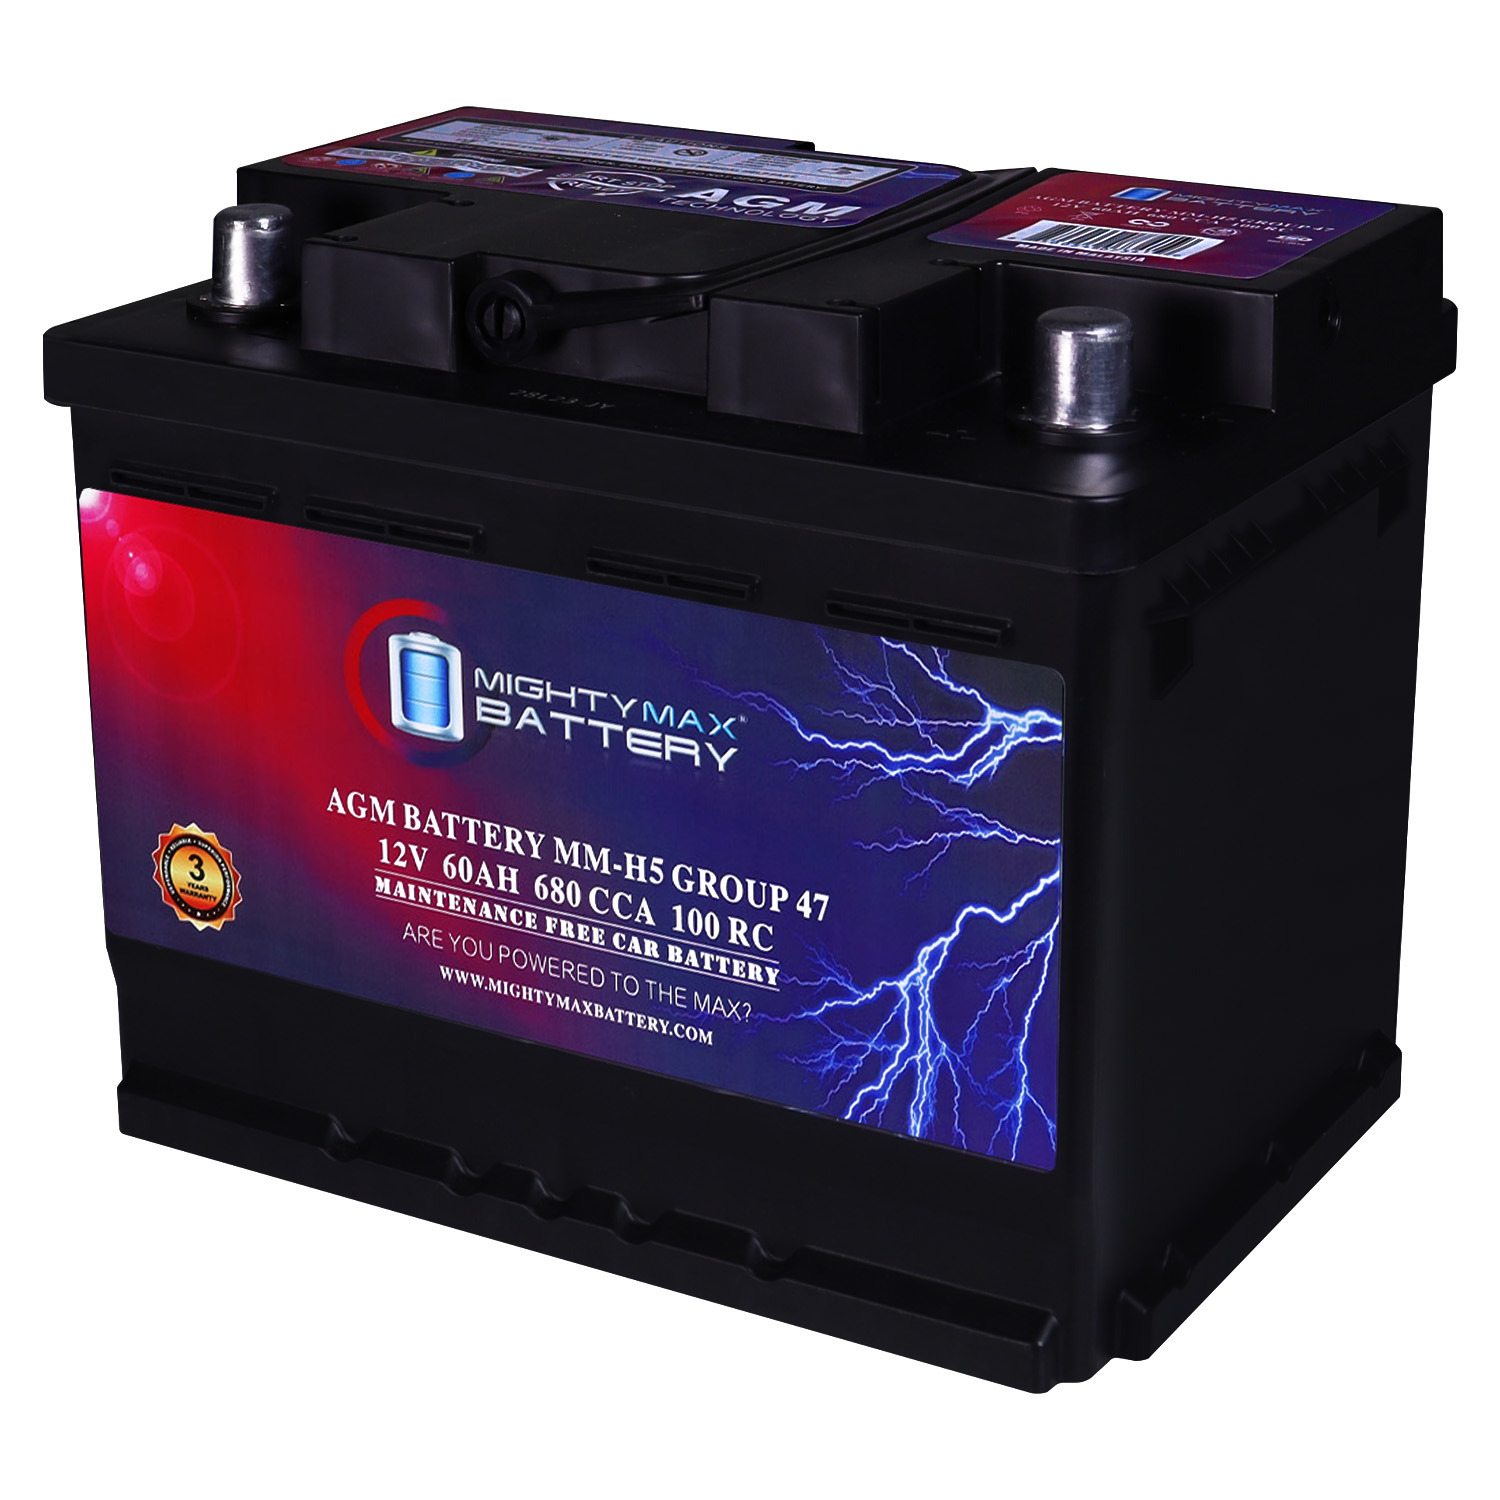 MM-H5 Group 47 12V 60AH 100RC 680CCA Replacement Battery Compatible with AGCO Tractor 5660 95-00